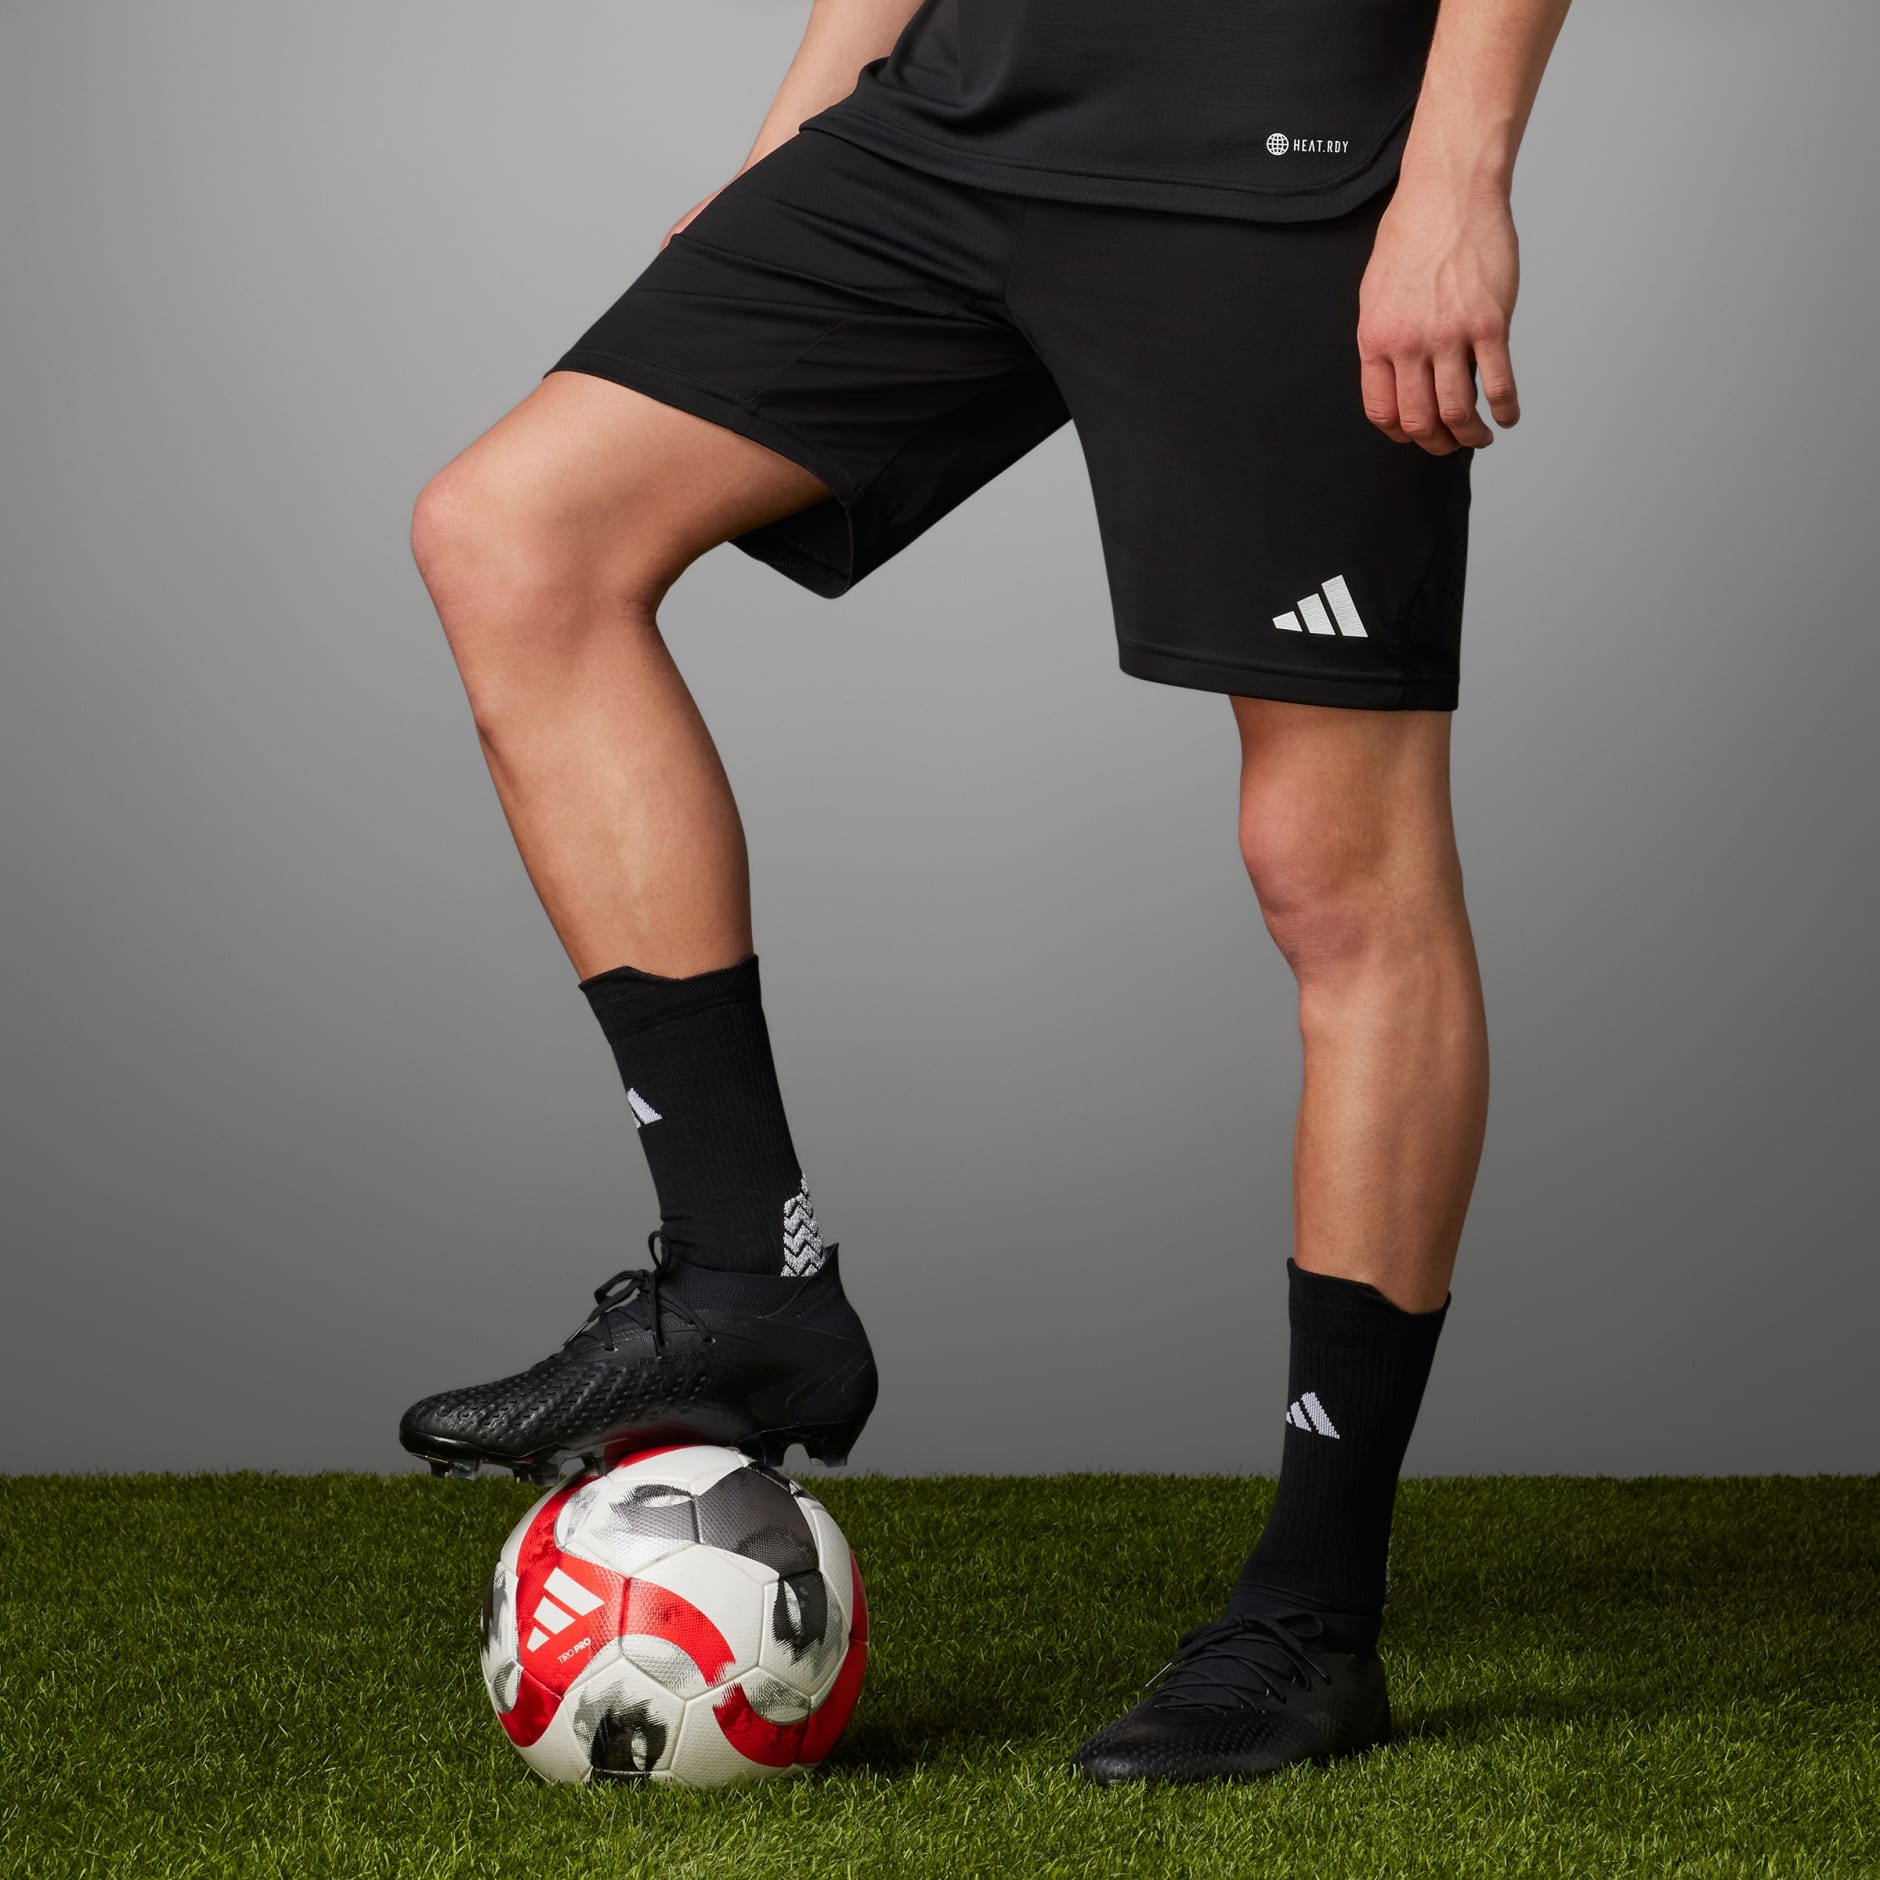 Shoes - Predator Accuracy.1 Firm Ground Boots - Black | adidas Egypt